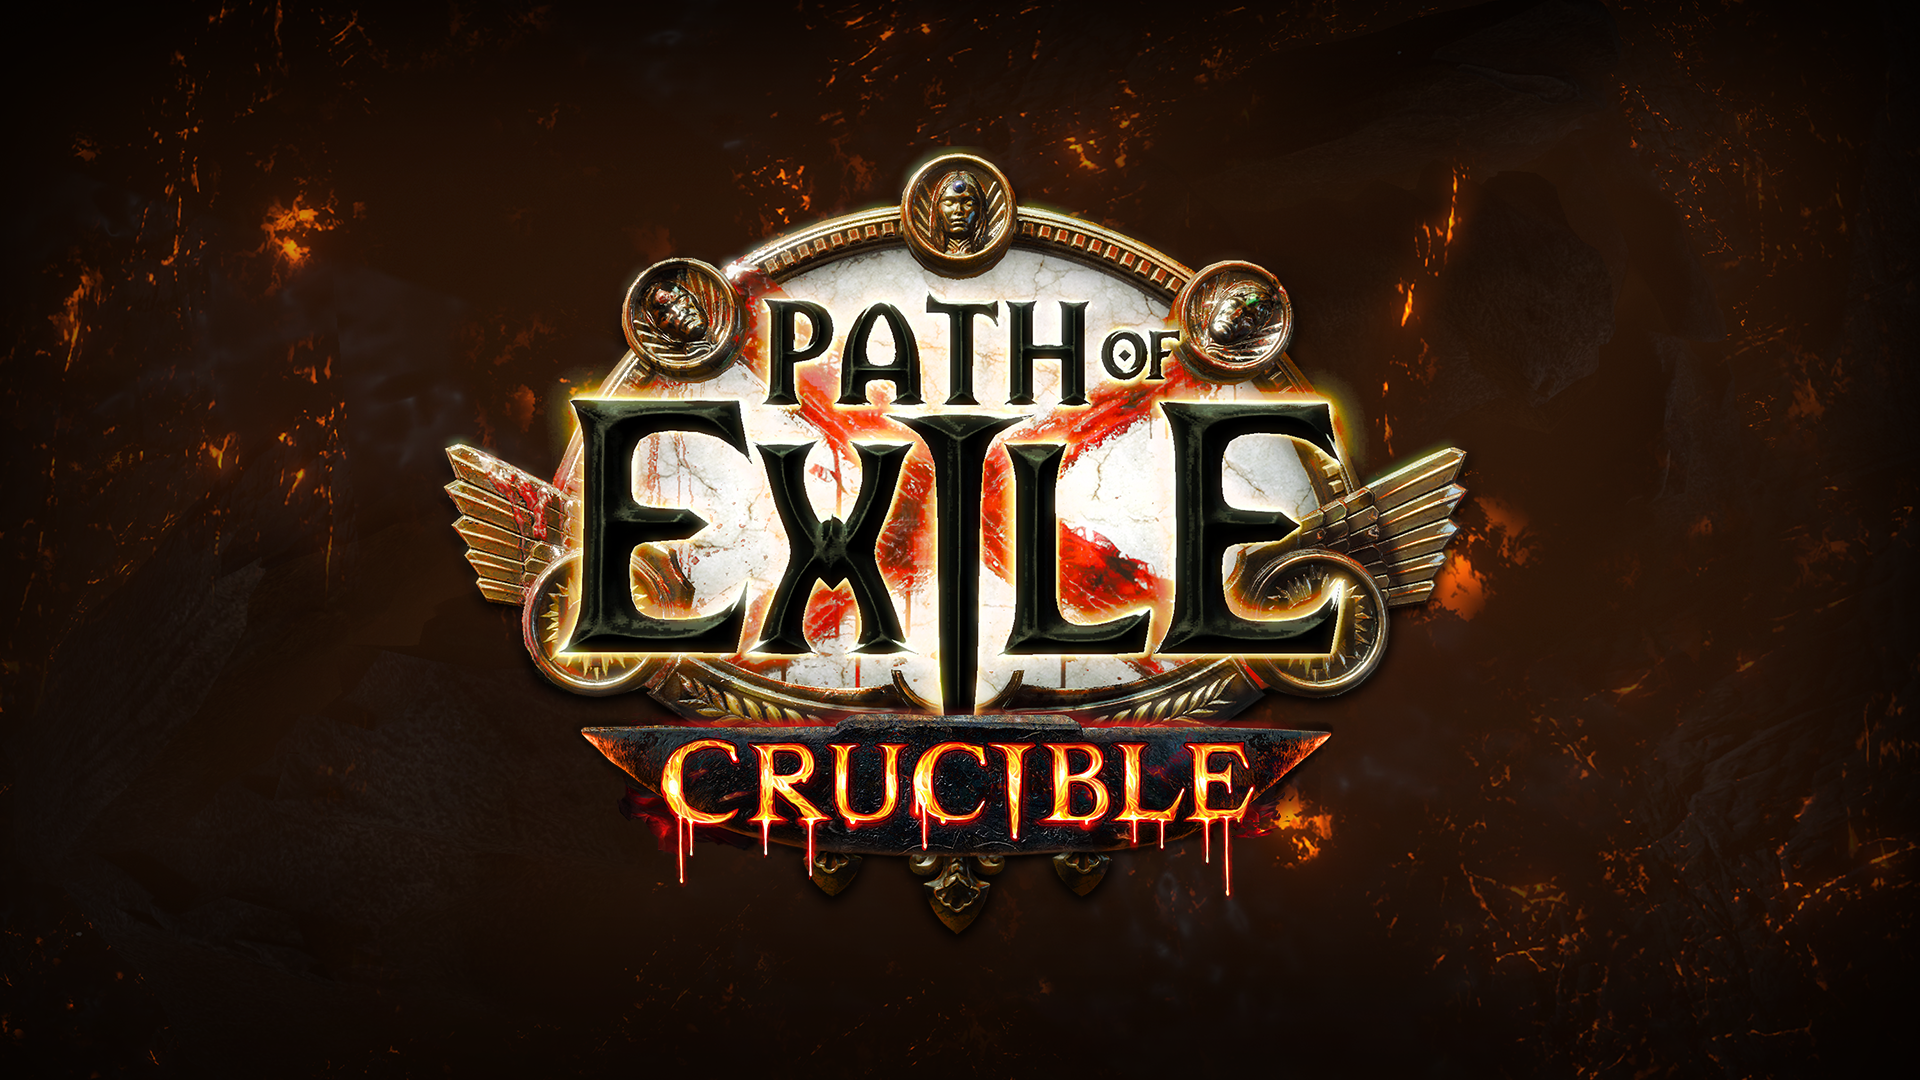 Path of Exile: Crucible trailer, details and patch notes